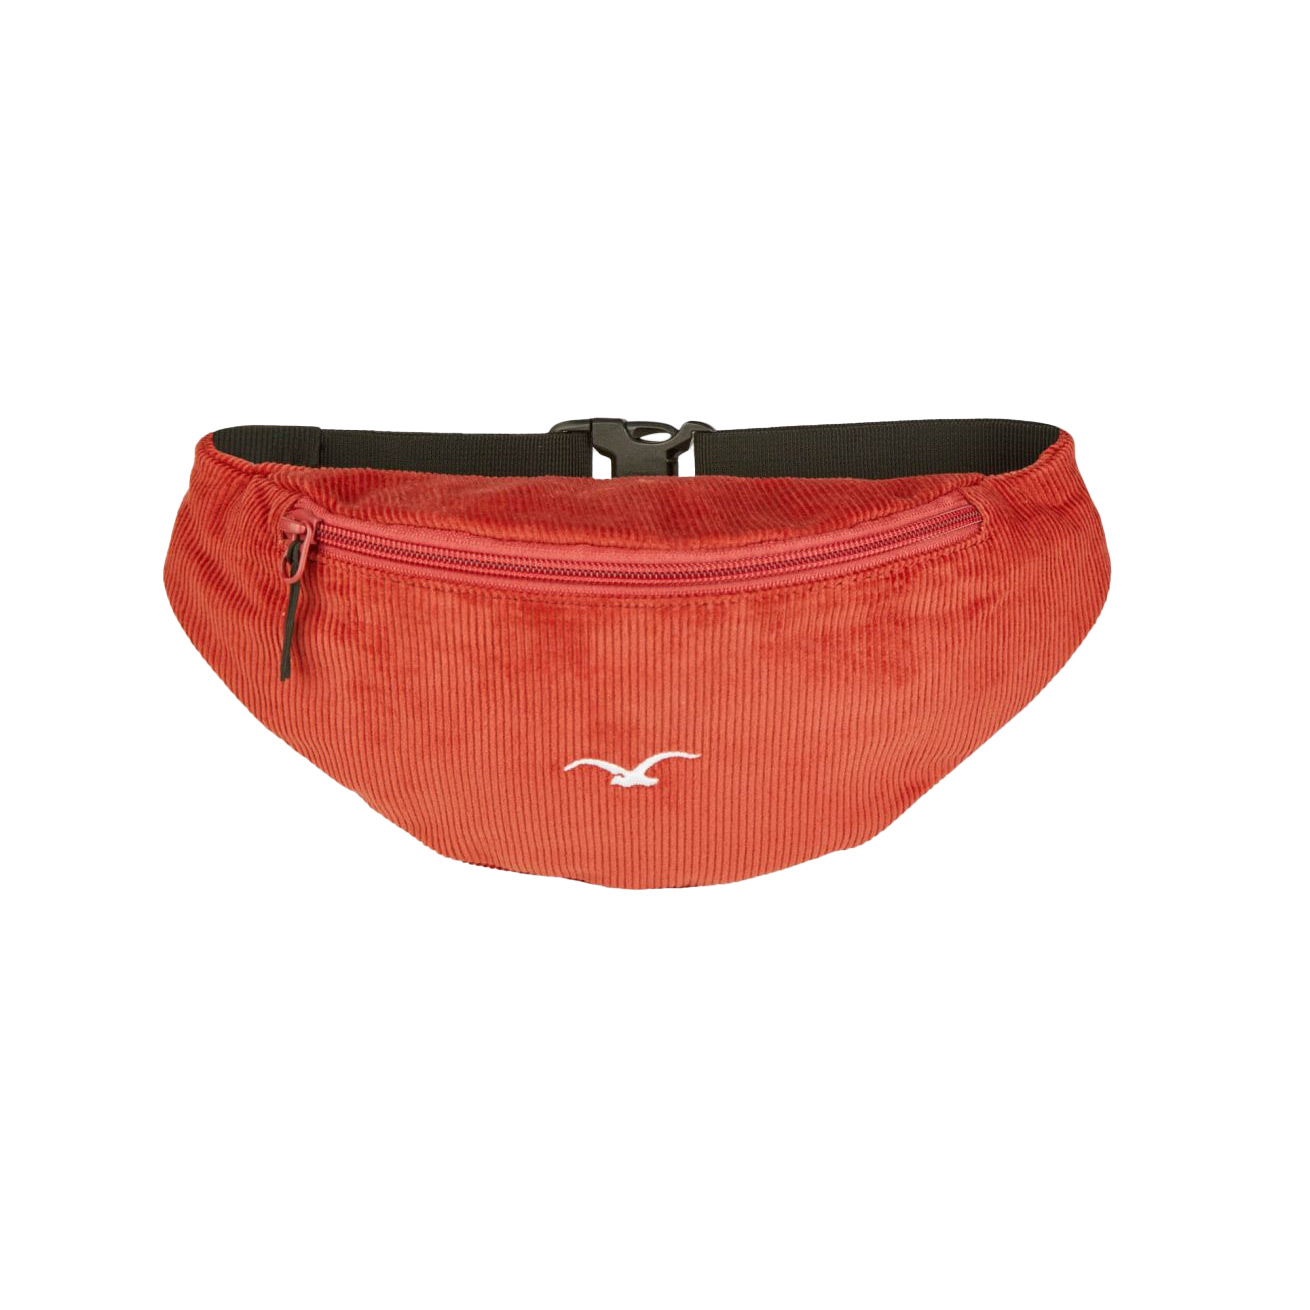 Cleptomanicx Hipbag Healer Cord (mineral red)